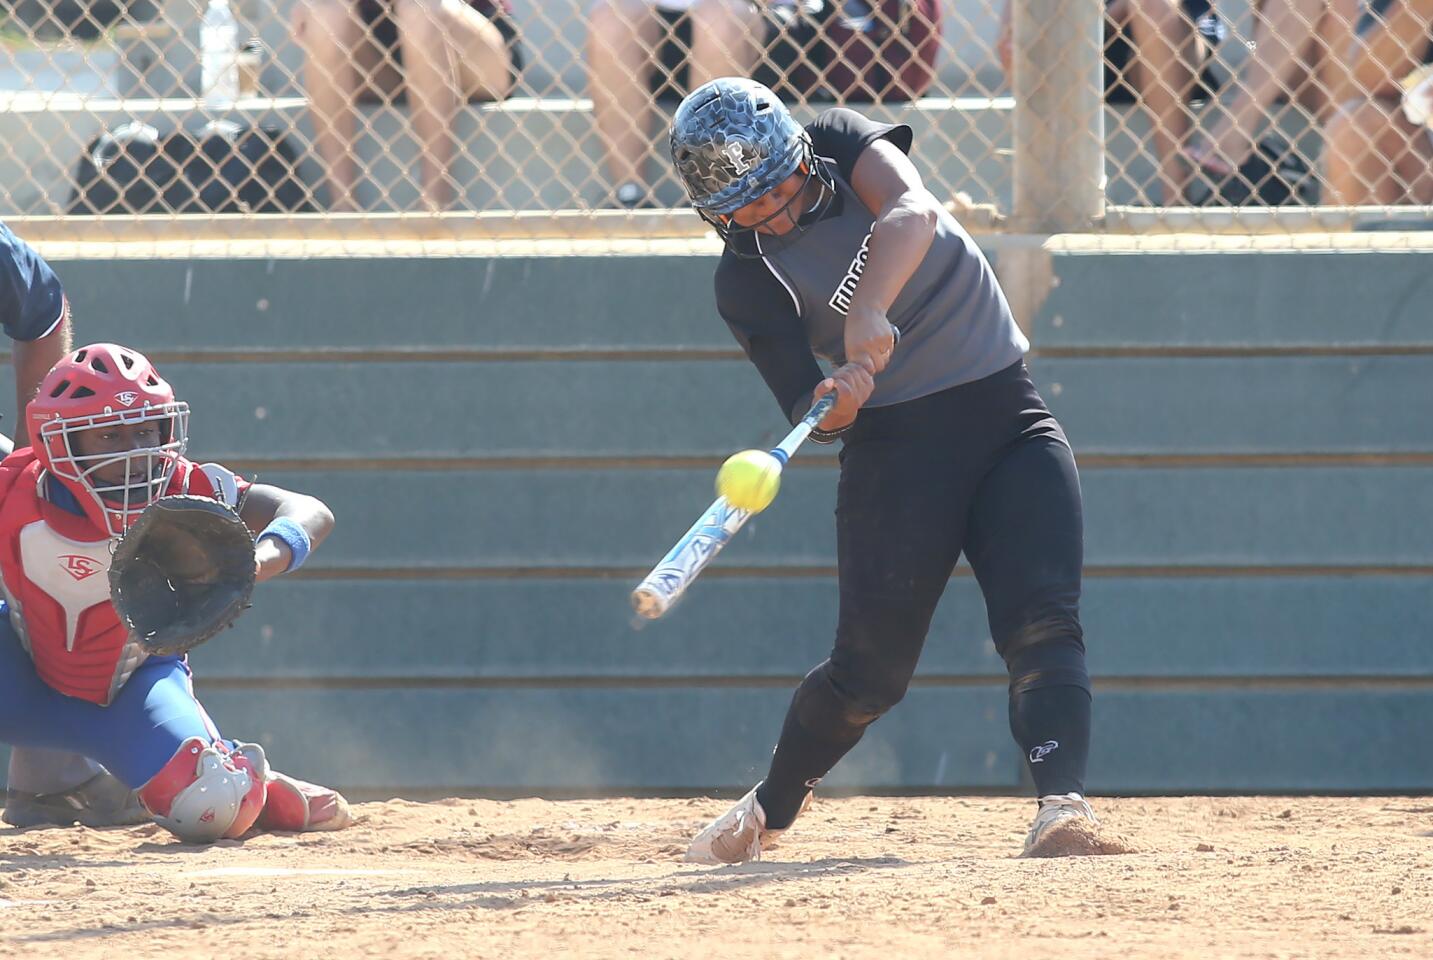 Firecracker's Laylo Melendez hits a home run to tie the score 2-2 during 16U Premier softball game of the PGF Nationals at Fountain Valley Sports Park on Thursday.